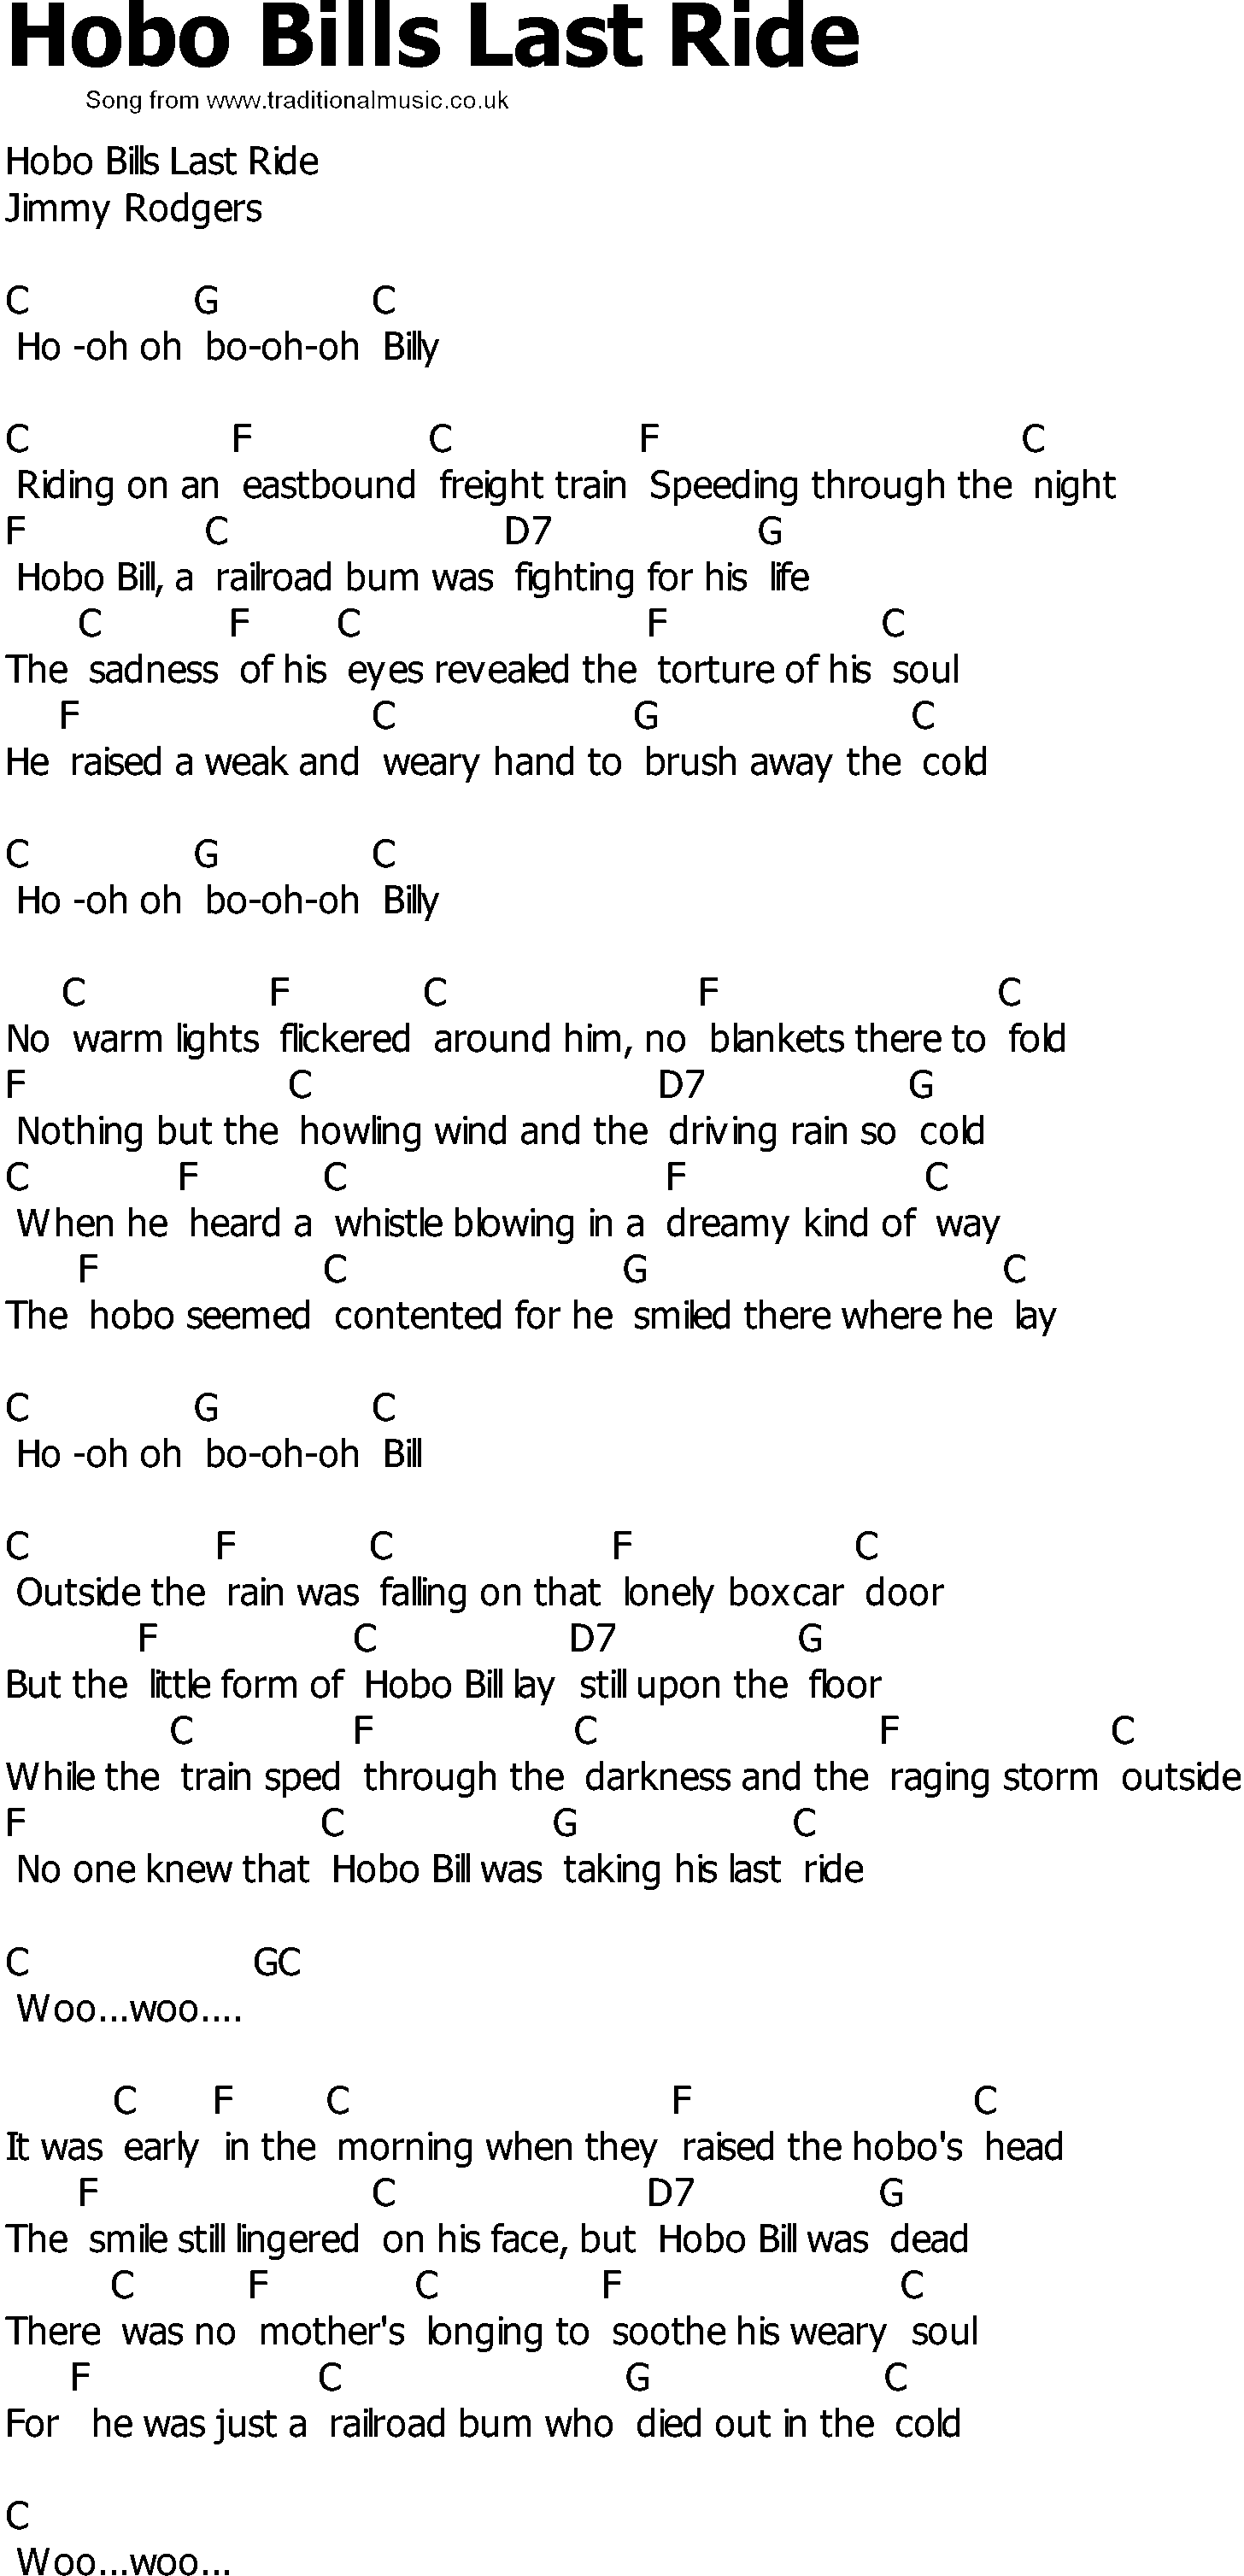 Old Country song lyrics with chords - Hobo Bills Last Ride